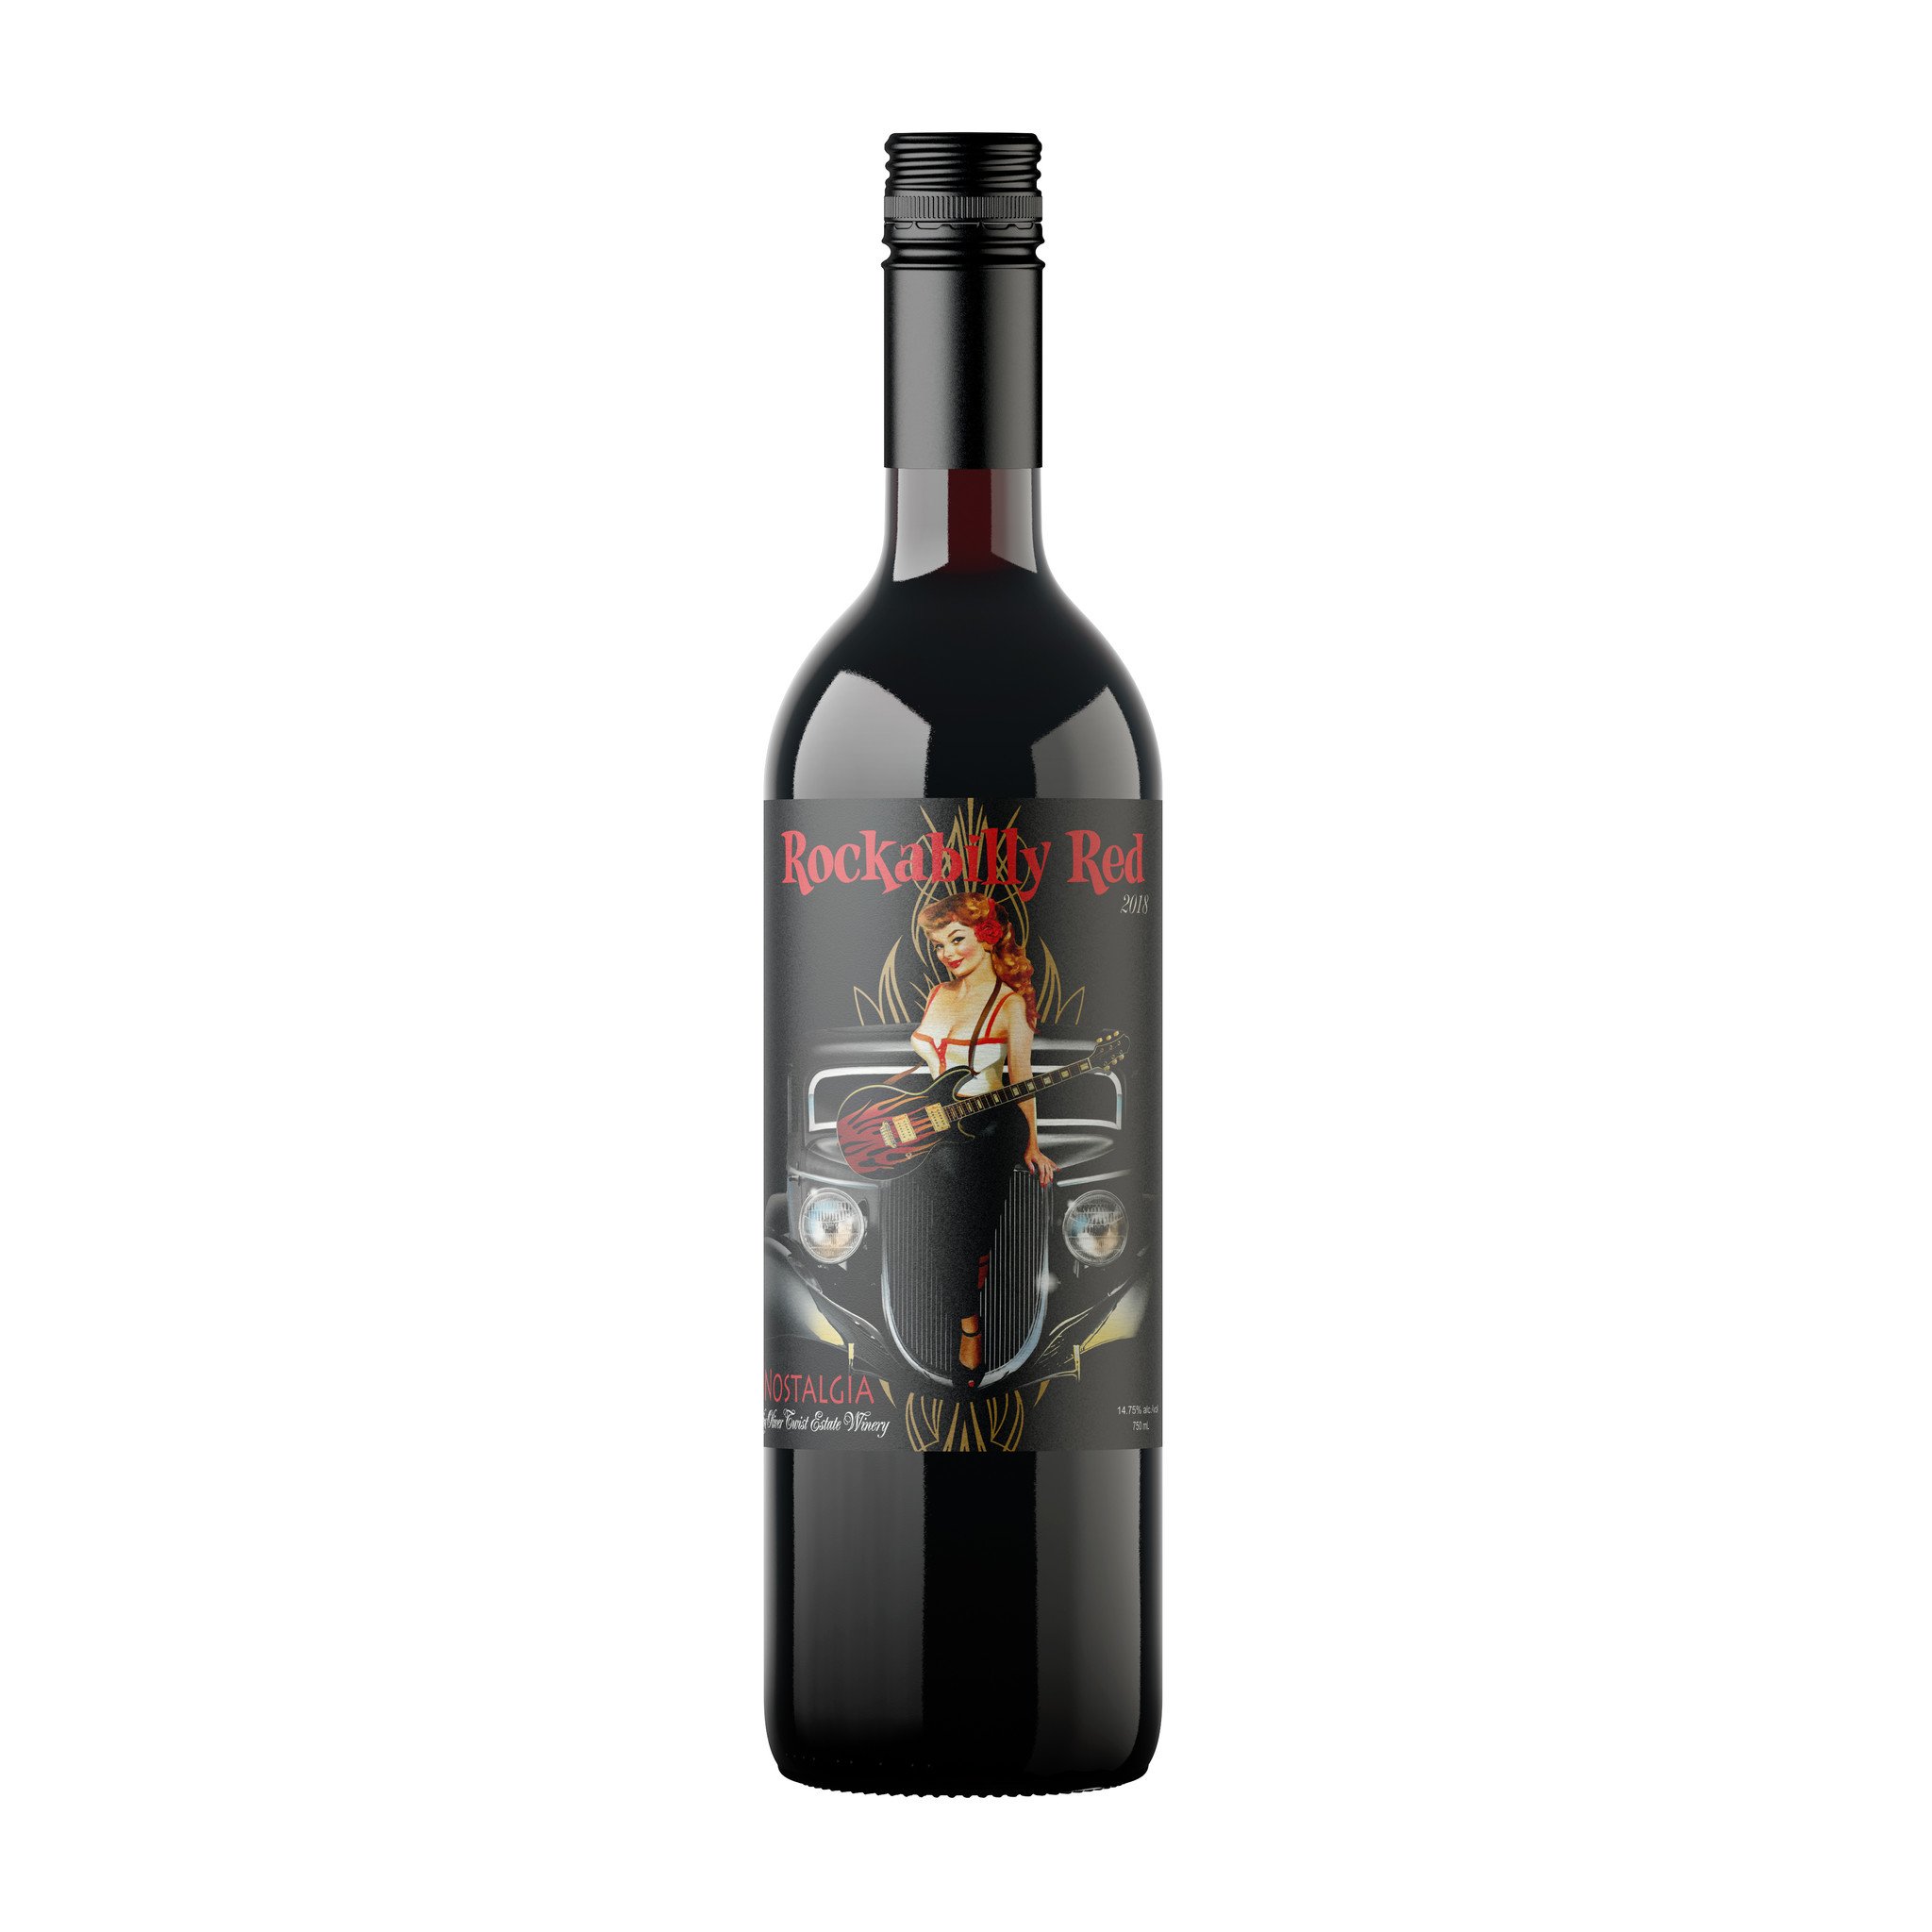 2019 Obsession Wines Red Blend